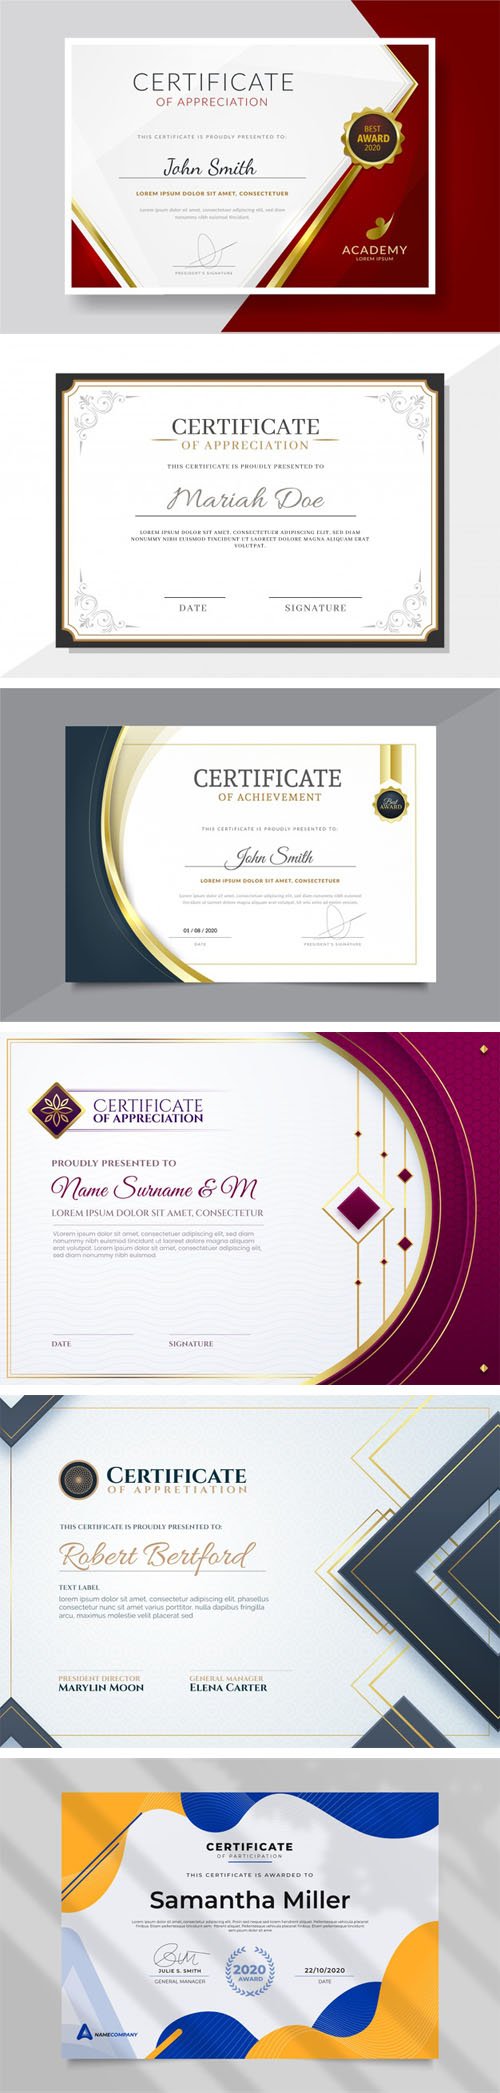 6 Modern Certificate & Diploma Templates in Vector